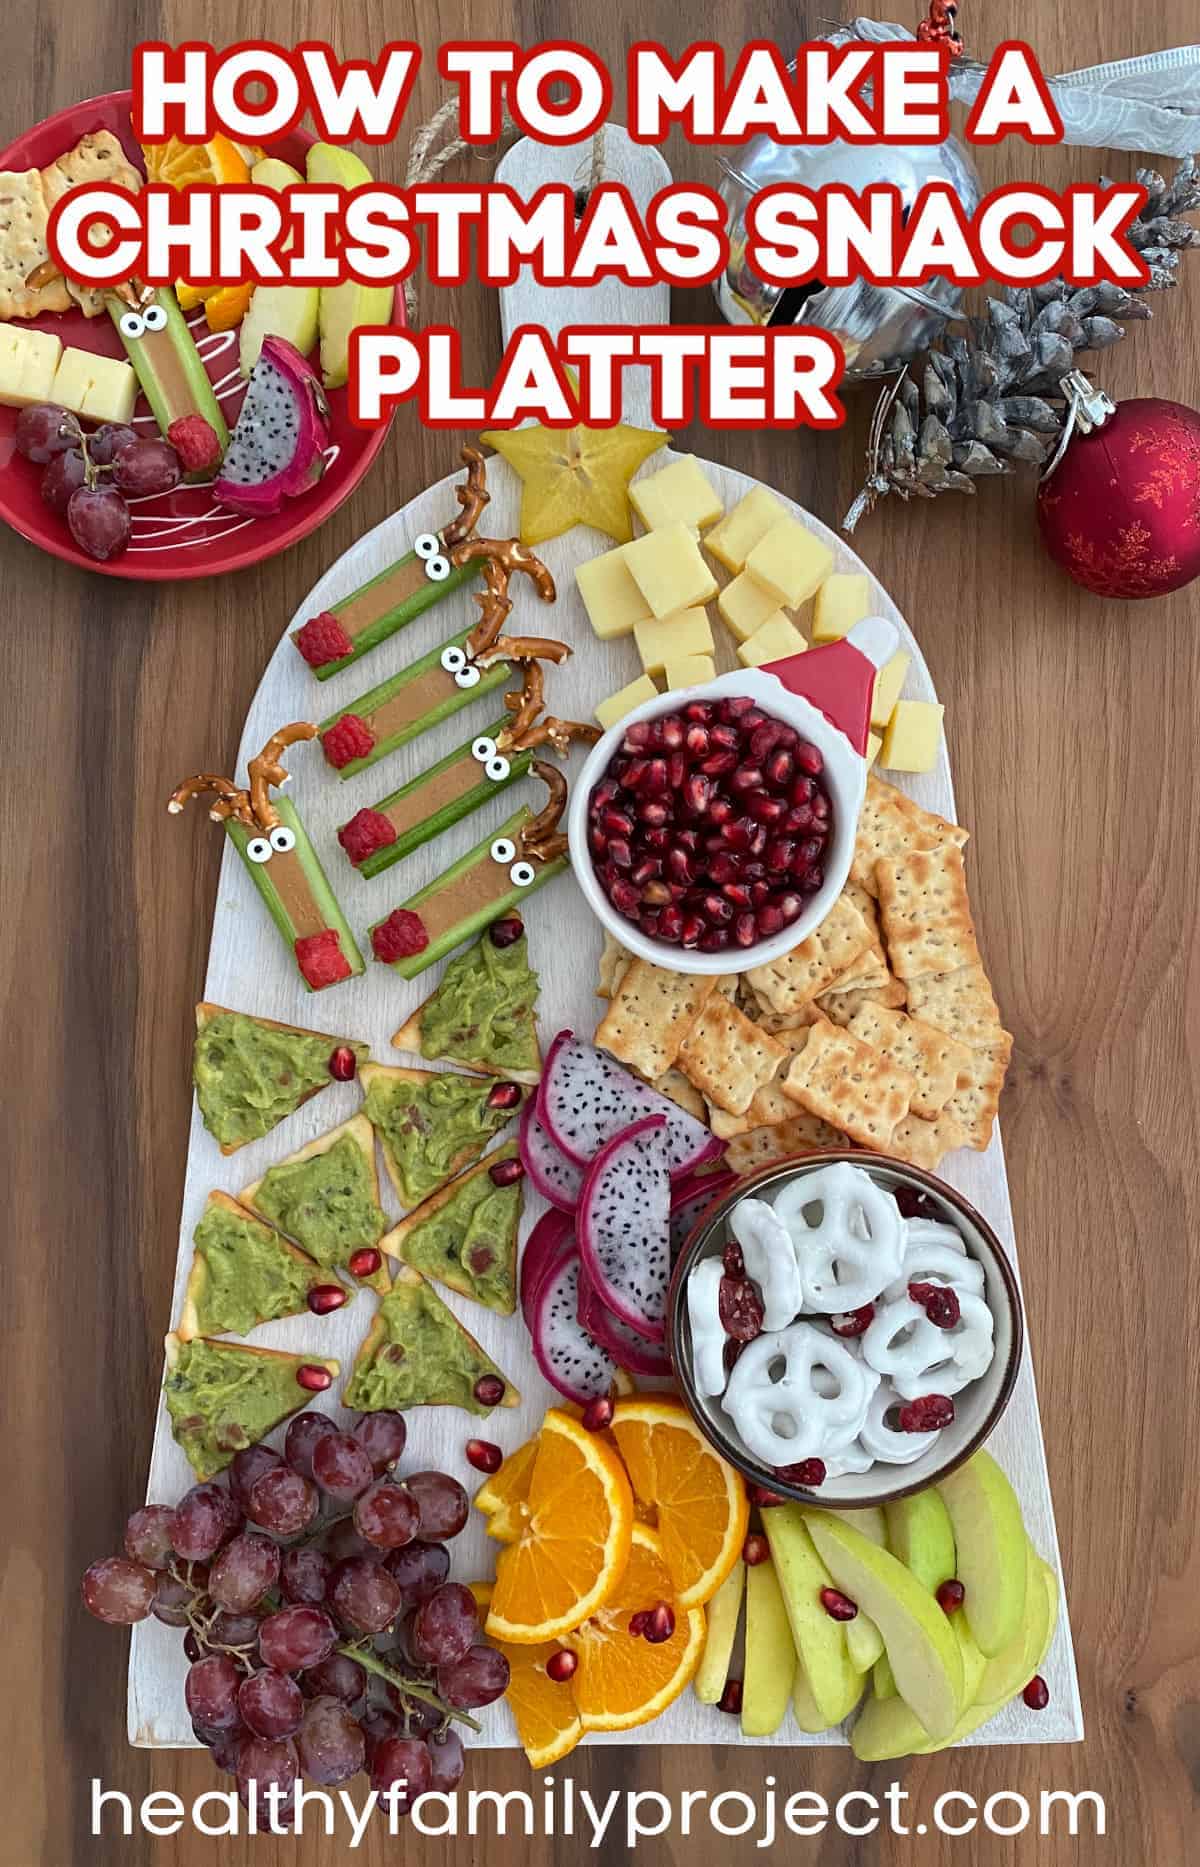 How To Make A Christmas Snack Platter